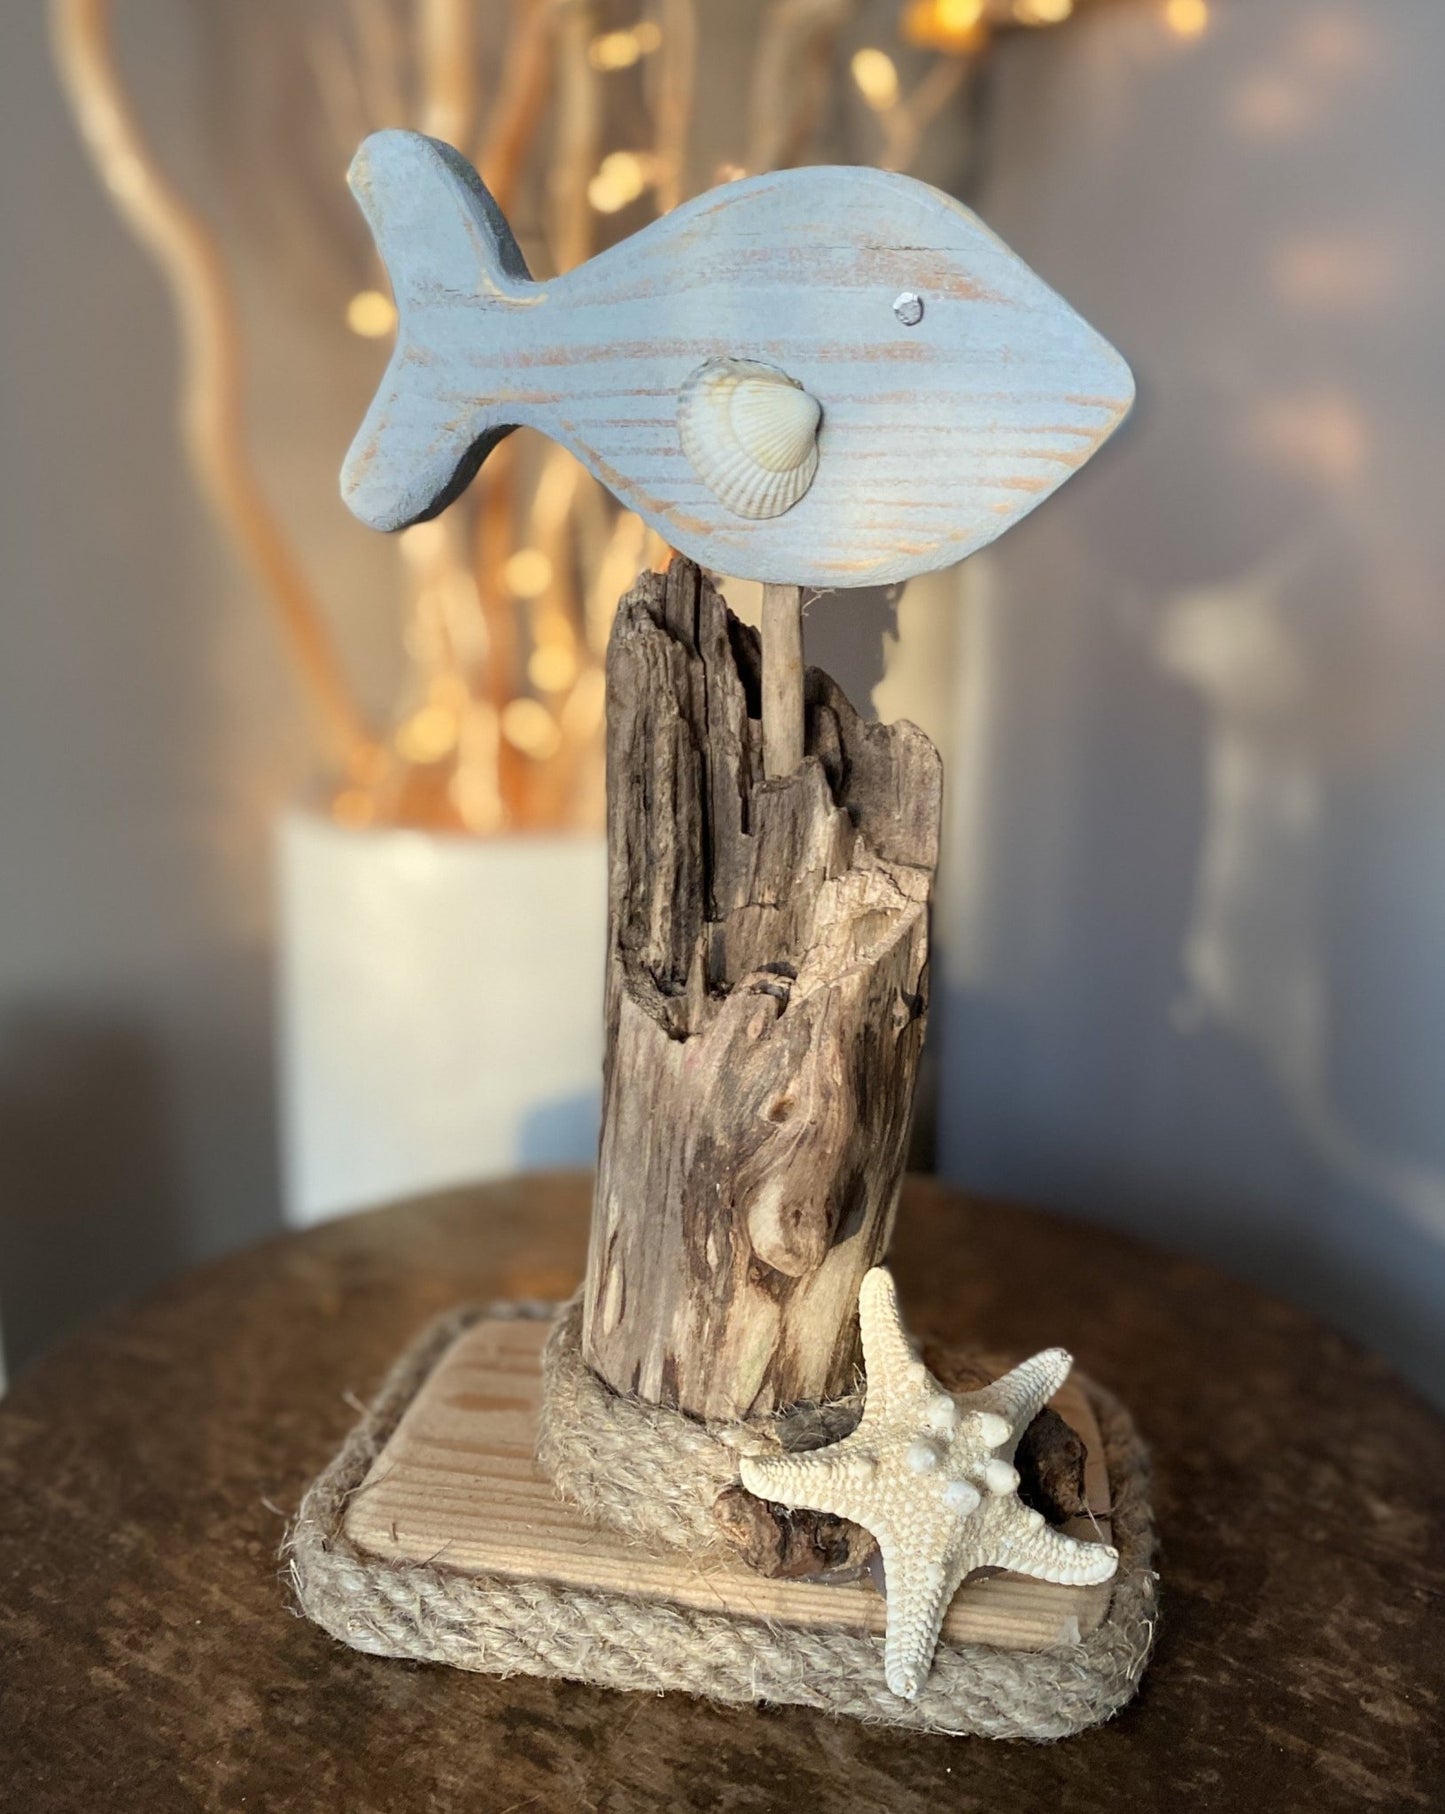 Driftwood Fish Home Decor with Starfish and Shell - Drift Craft by Jo